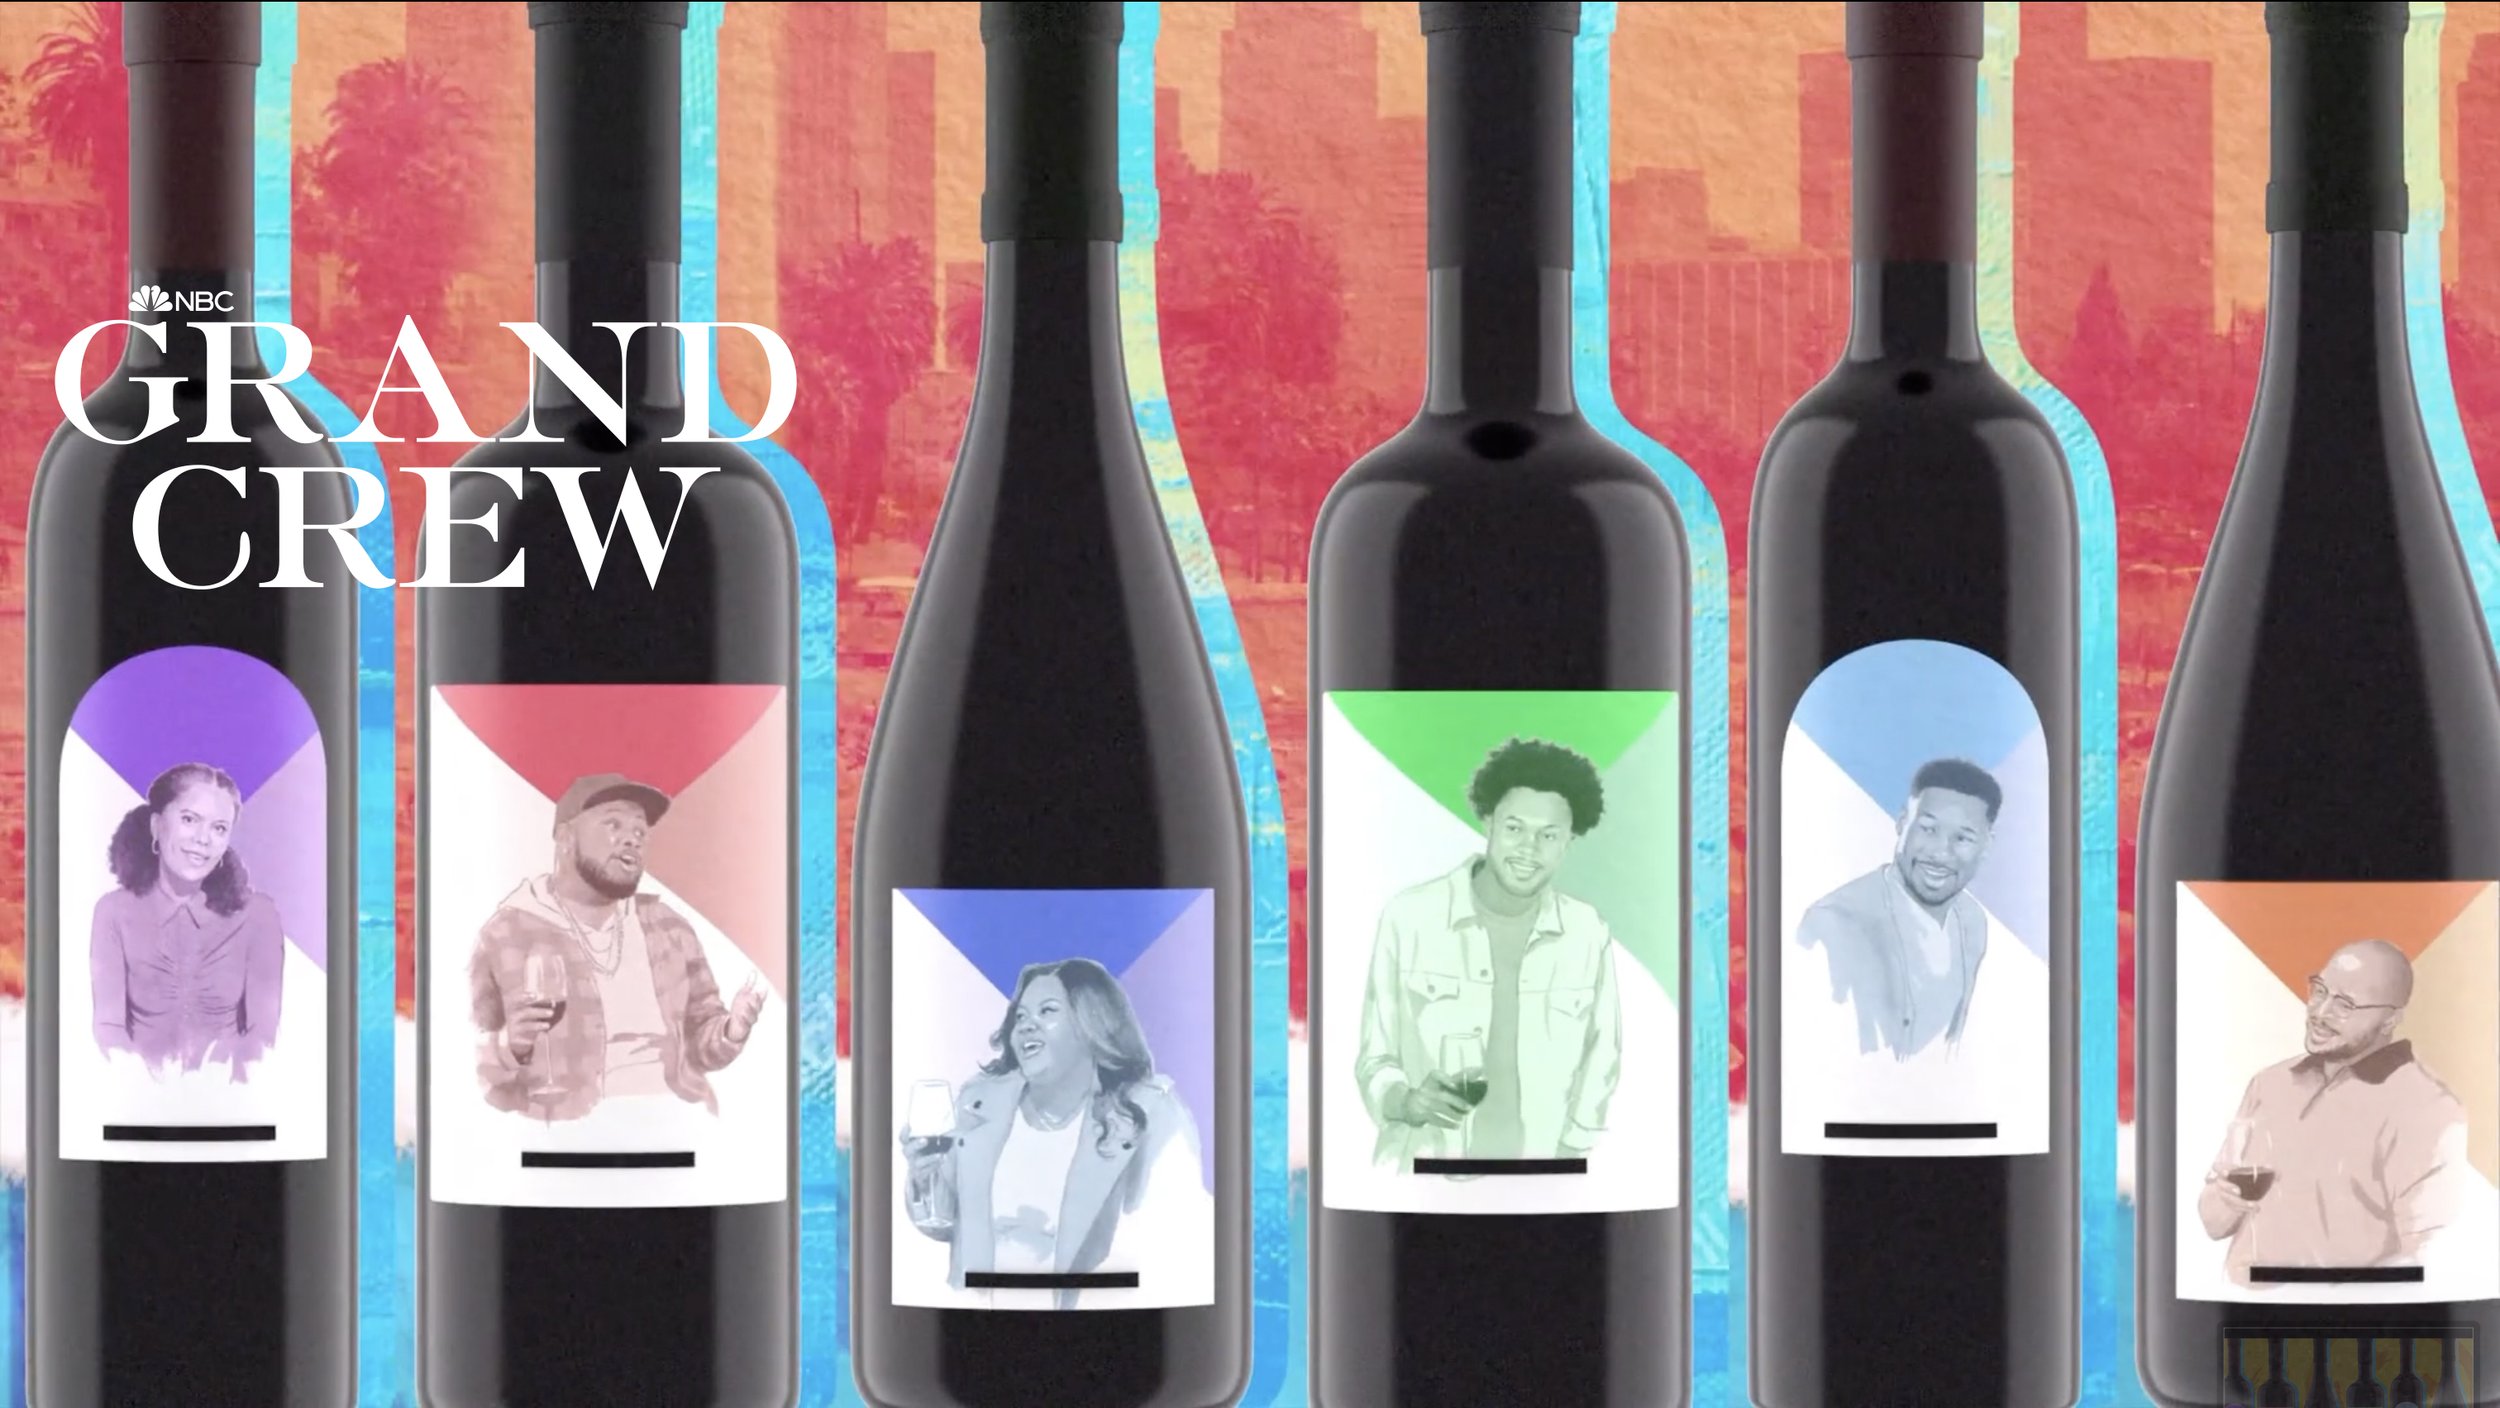 Bottle artwork for NBC's Grand Crew sitcom opening title sequence with Sarofsky, 2021